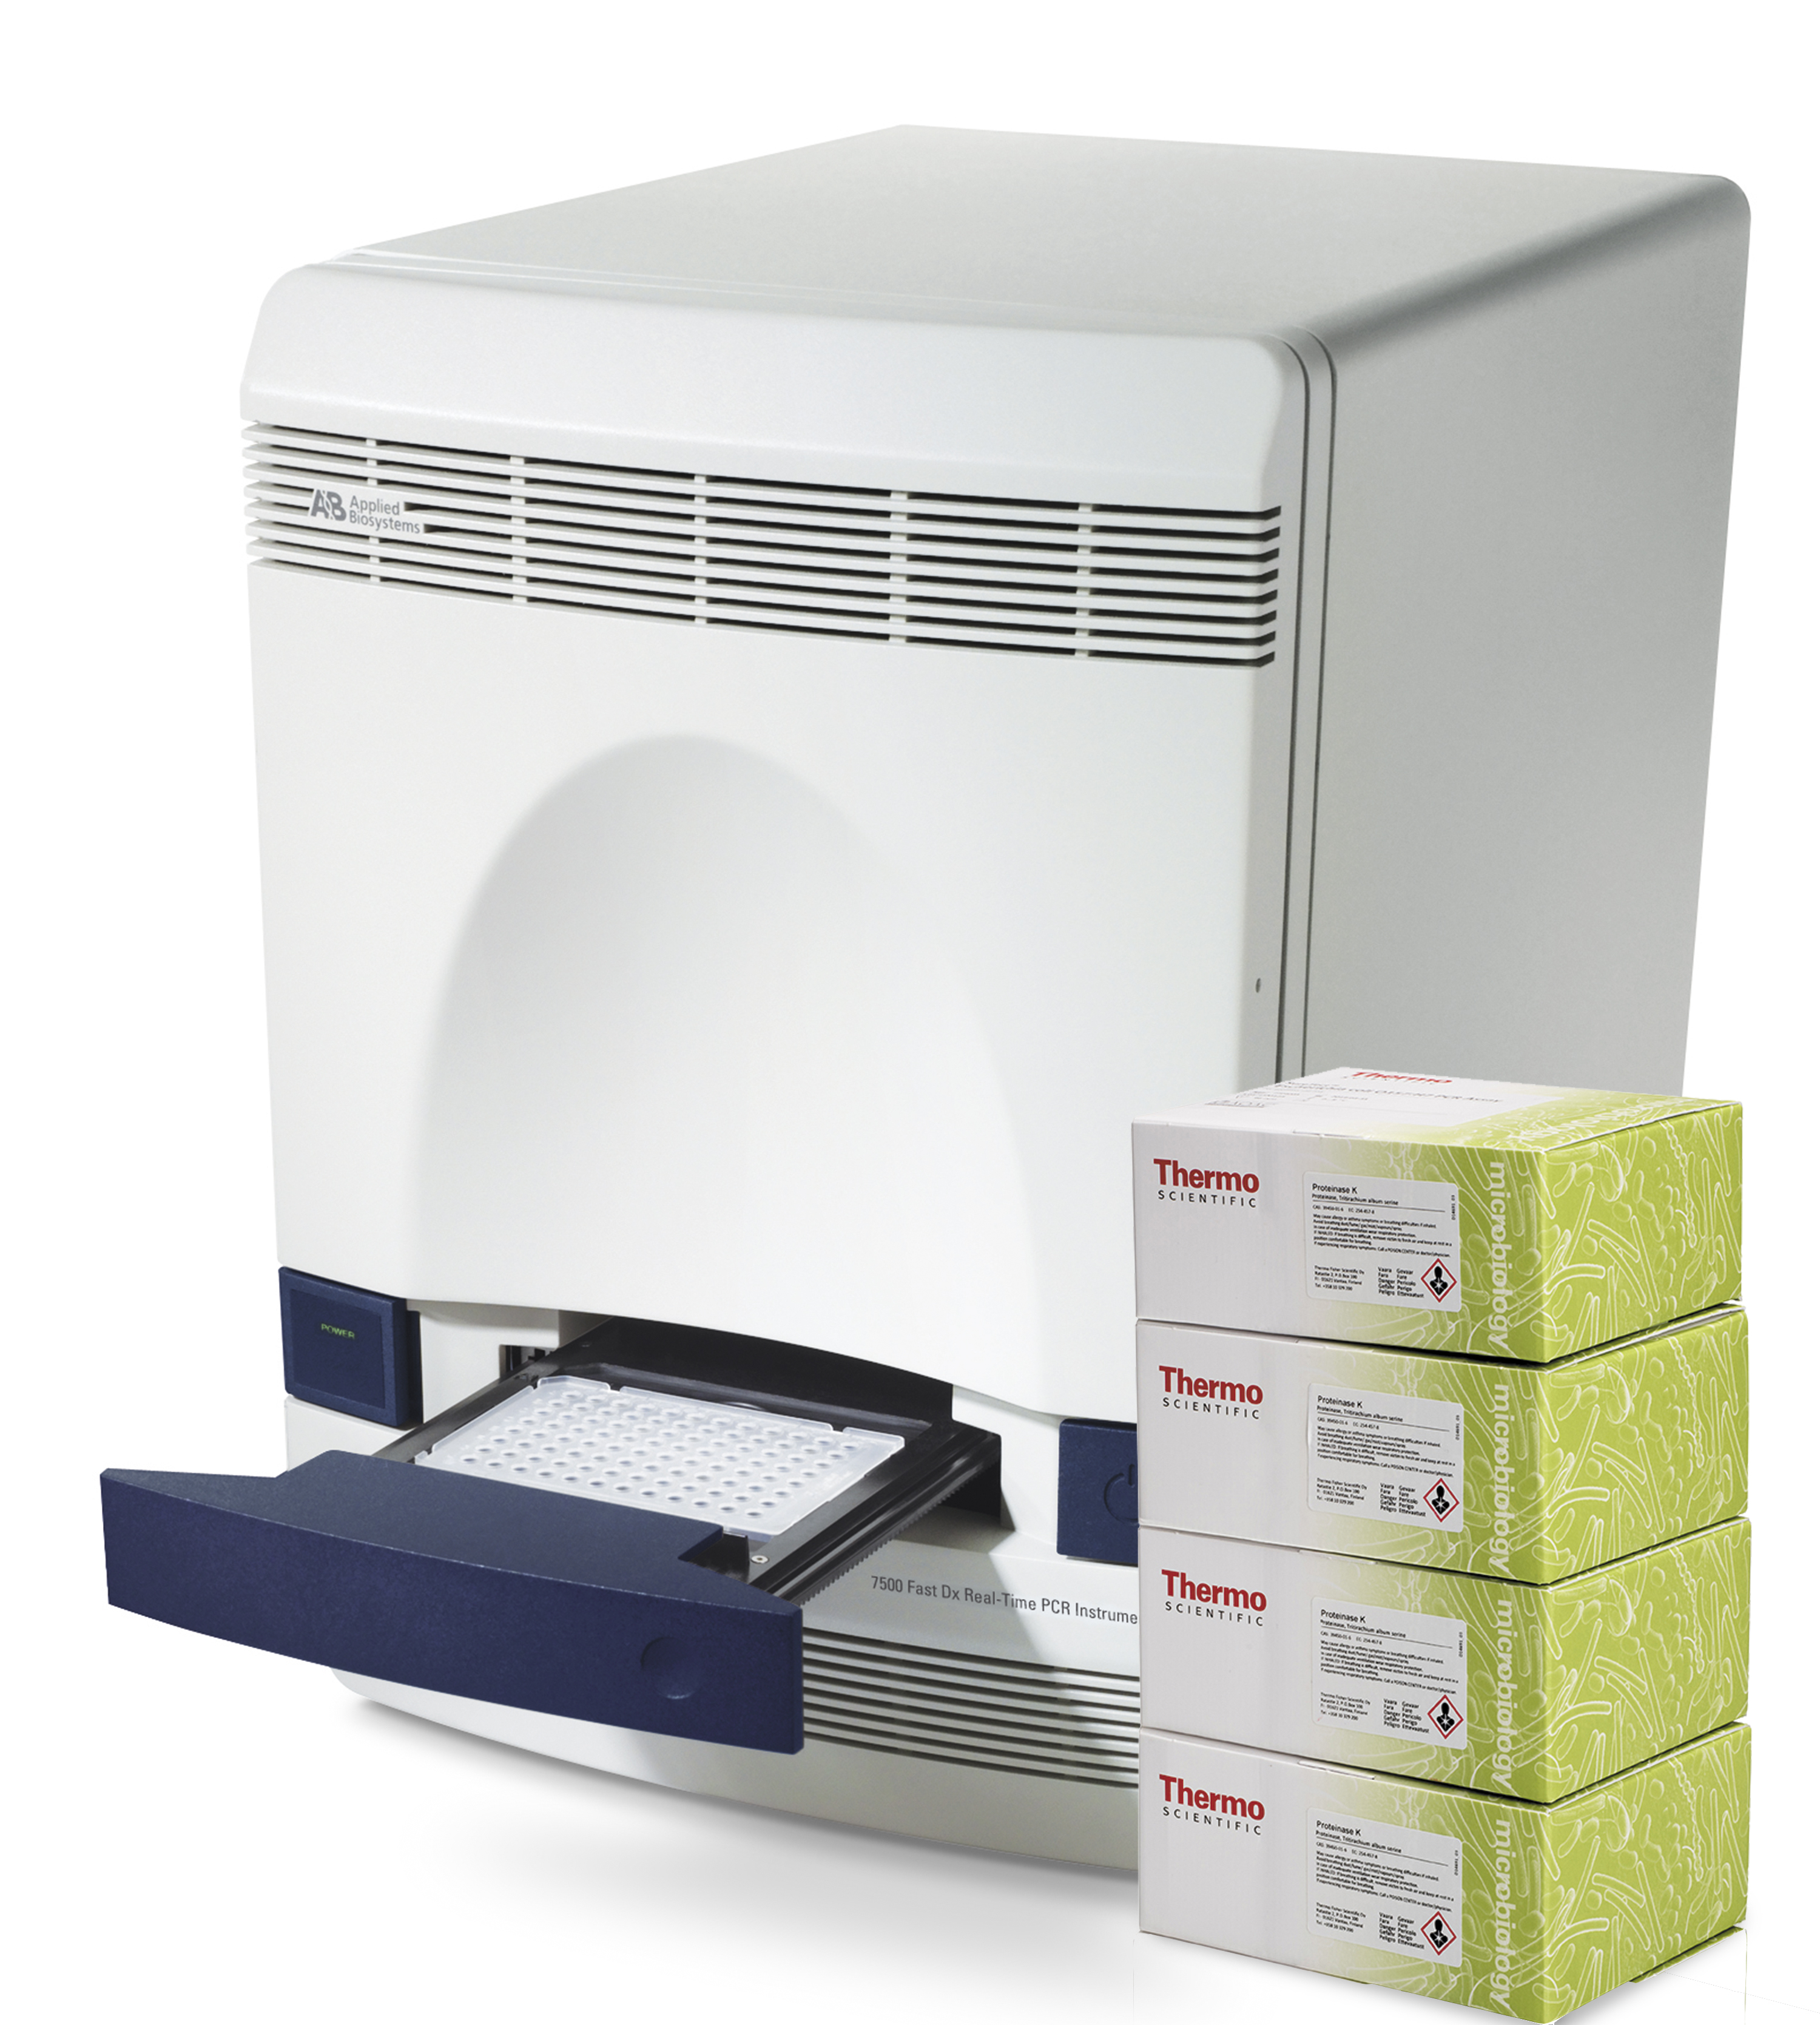 7500 Fast & 7500 Real-Time PCR System